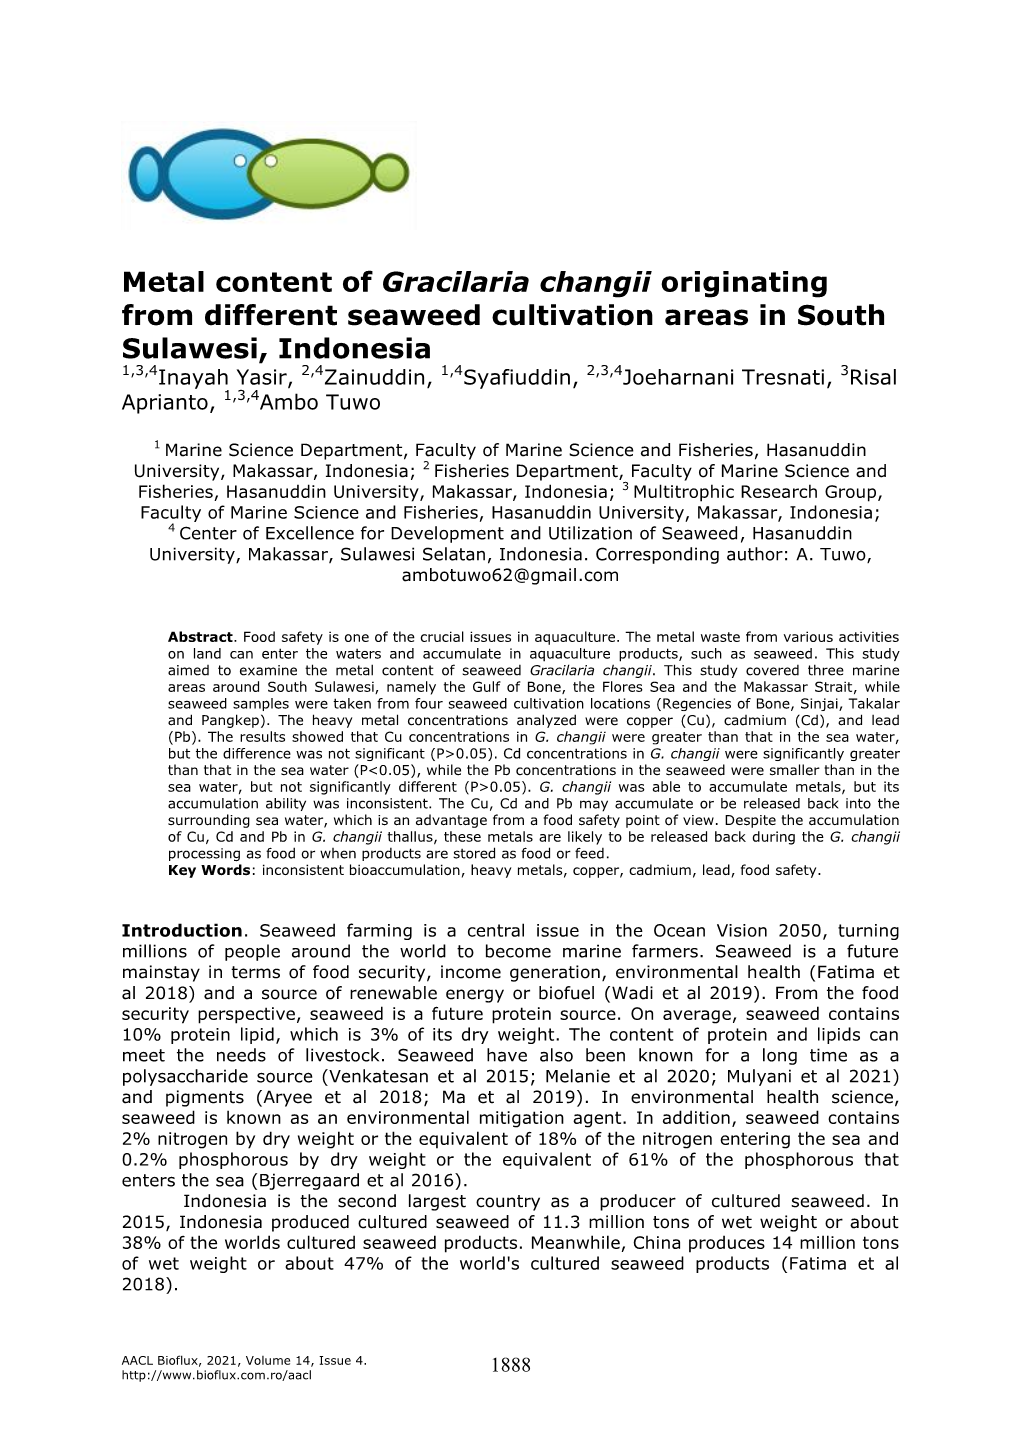 Metal Content of Gracilaria Changii Originating from Different Seaweed